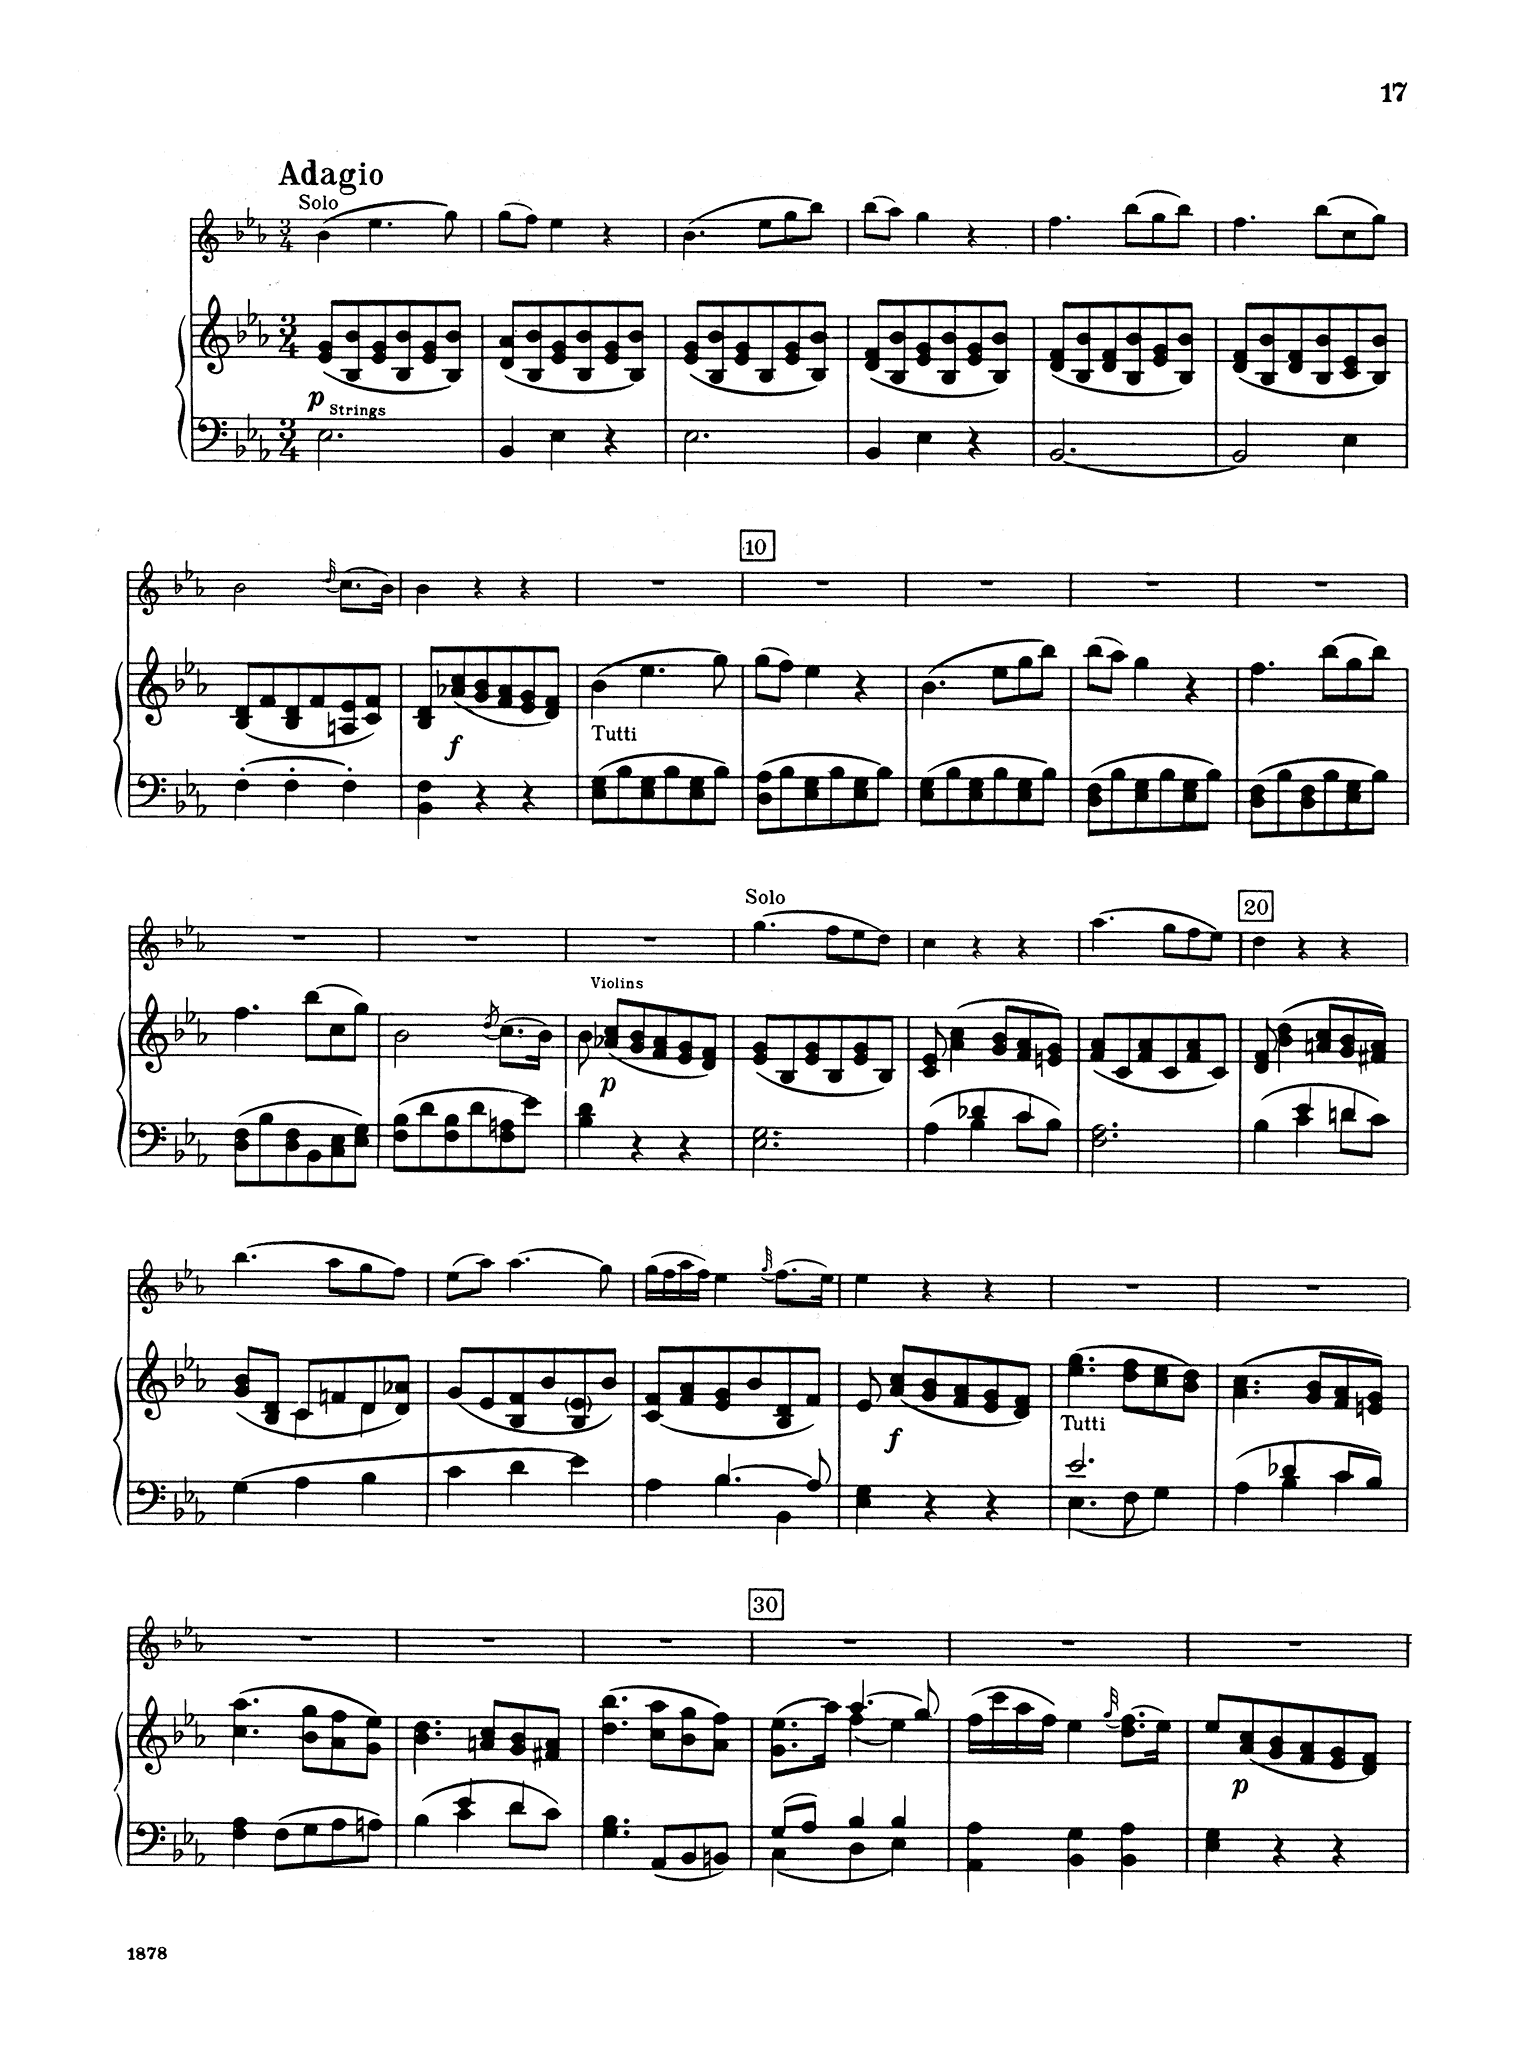 Clarinet Concerto in A Major, K. 622 (B-flat version) - Movement 2